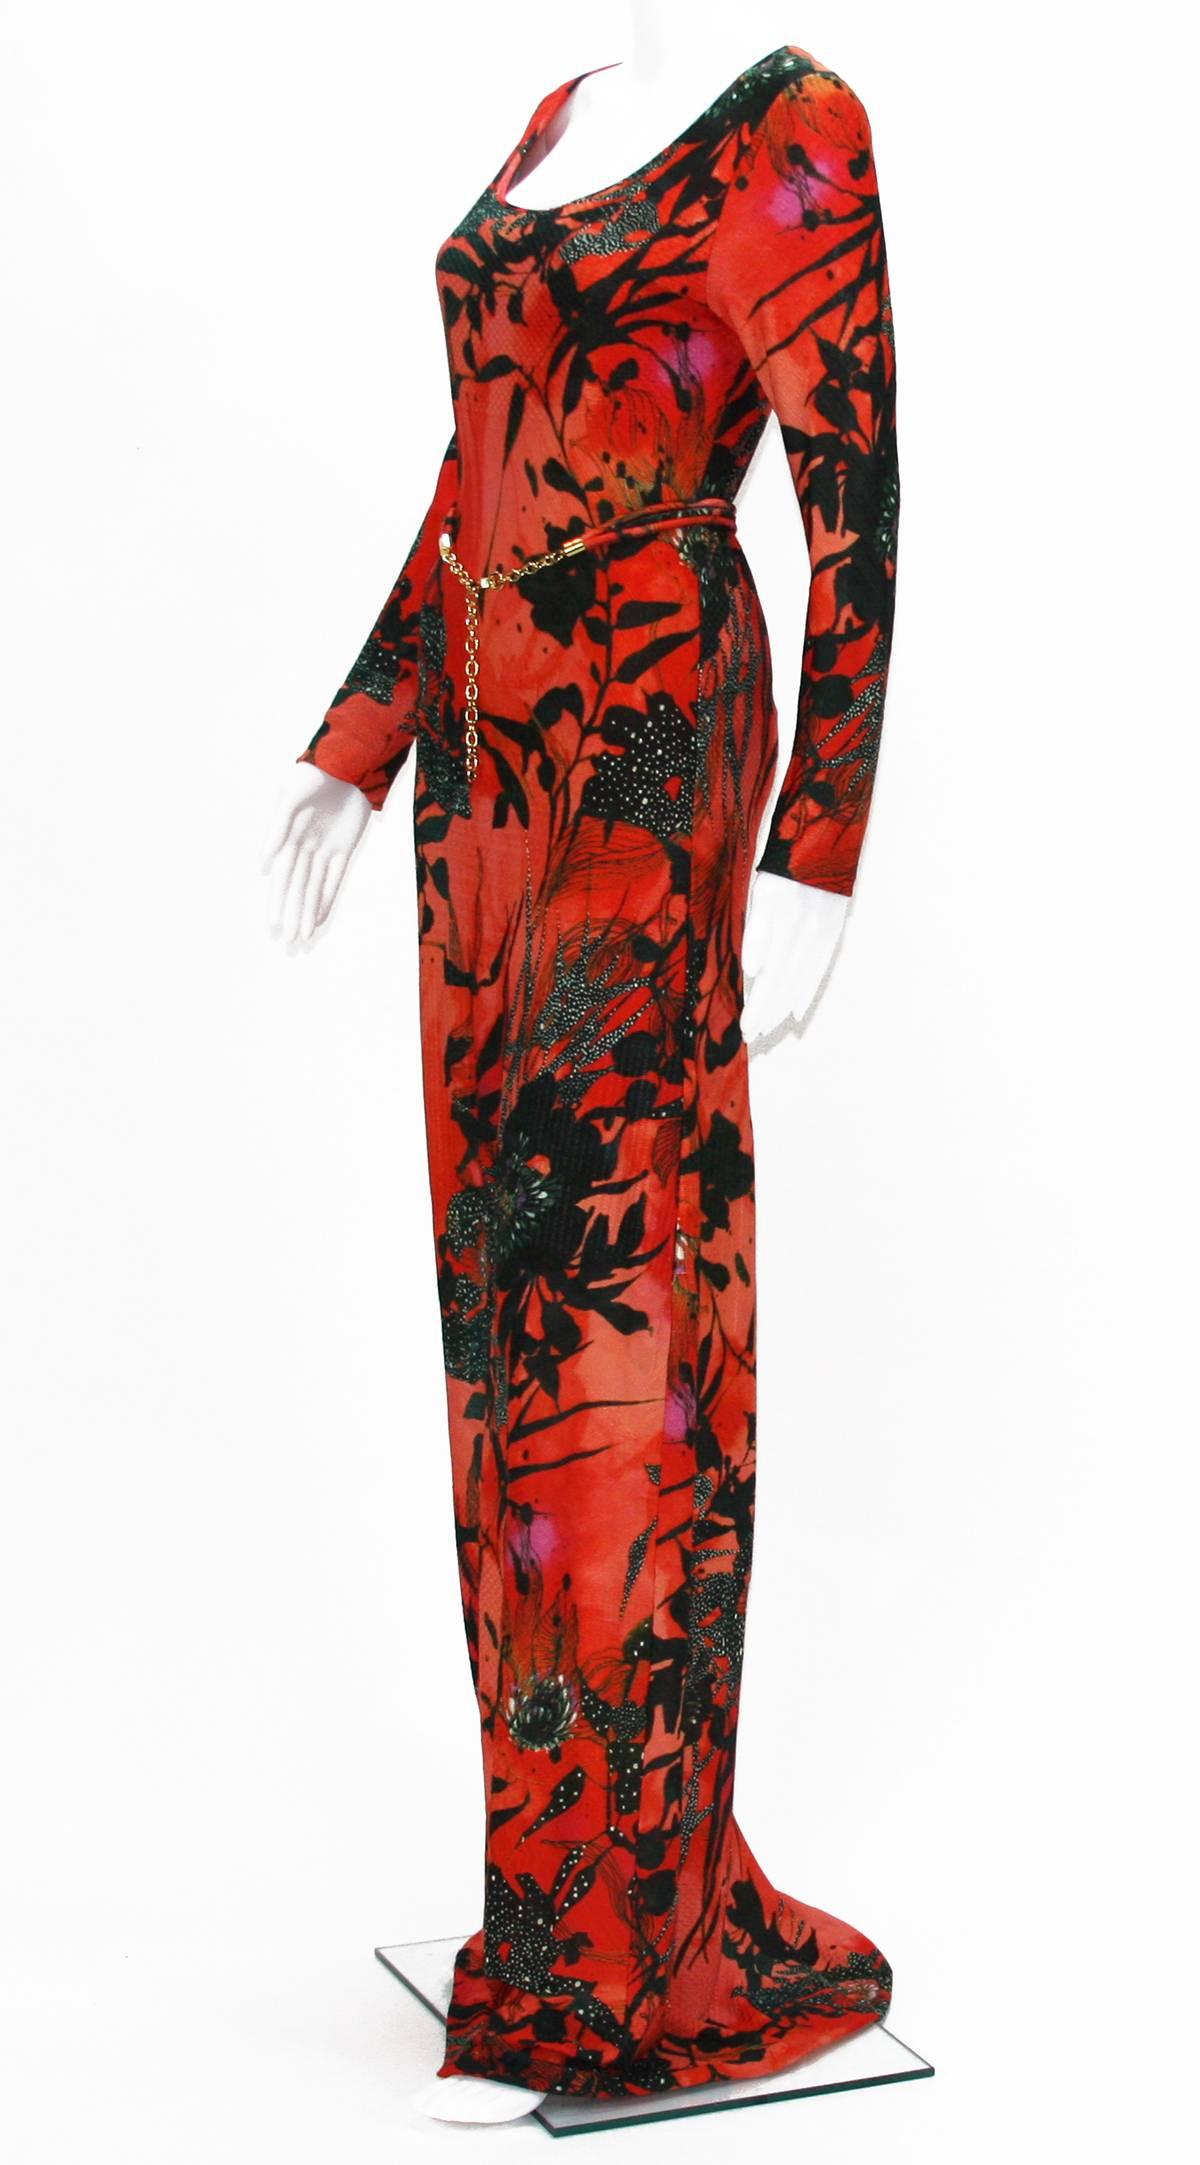 New ETRO Jersey Red Black Long Dress
Italian Size 42 – US 6
Main Colors – Orange/Red, Black
Stretch Jersey Fabric
Floral Print Front and Back
Long Sleeve, Slip-On Style
Detachable Belt with Gold Tone Metal Adjustable Details
Semi Lined
Made in